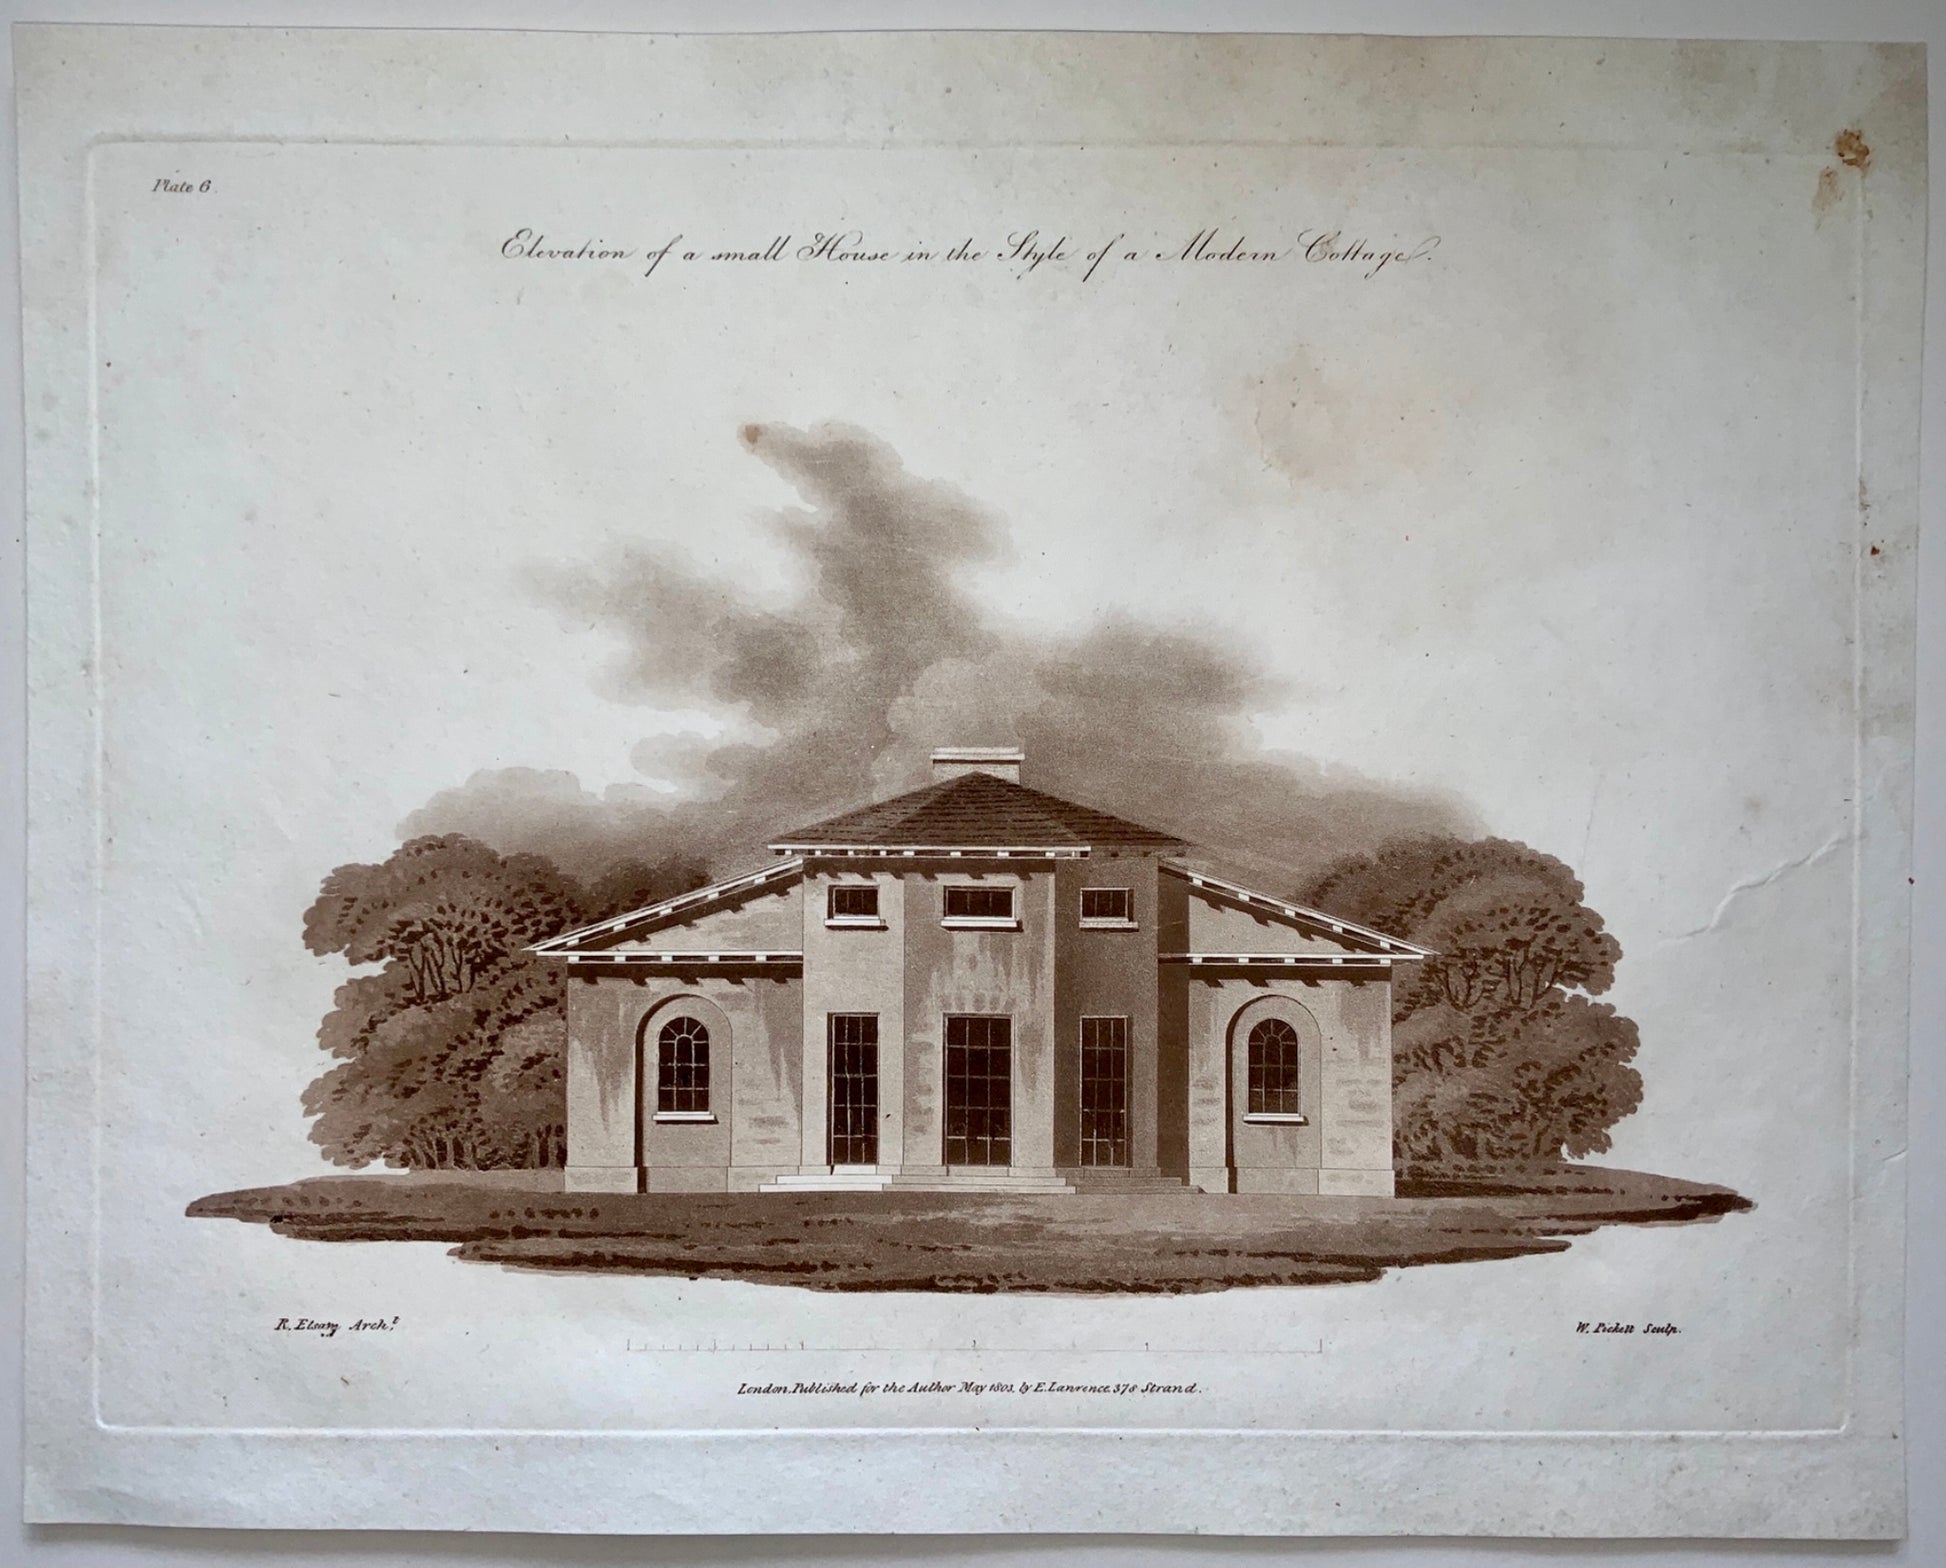 1803 Richard Elsam - Folio aquatint - House in Style of Modern Cottage - Architecture